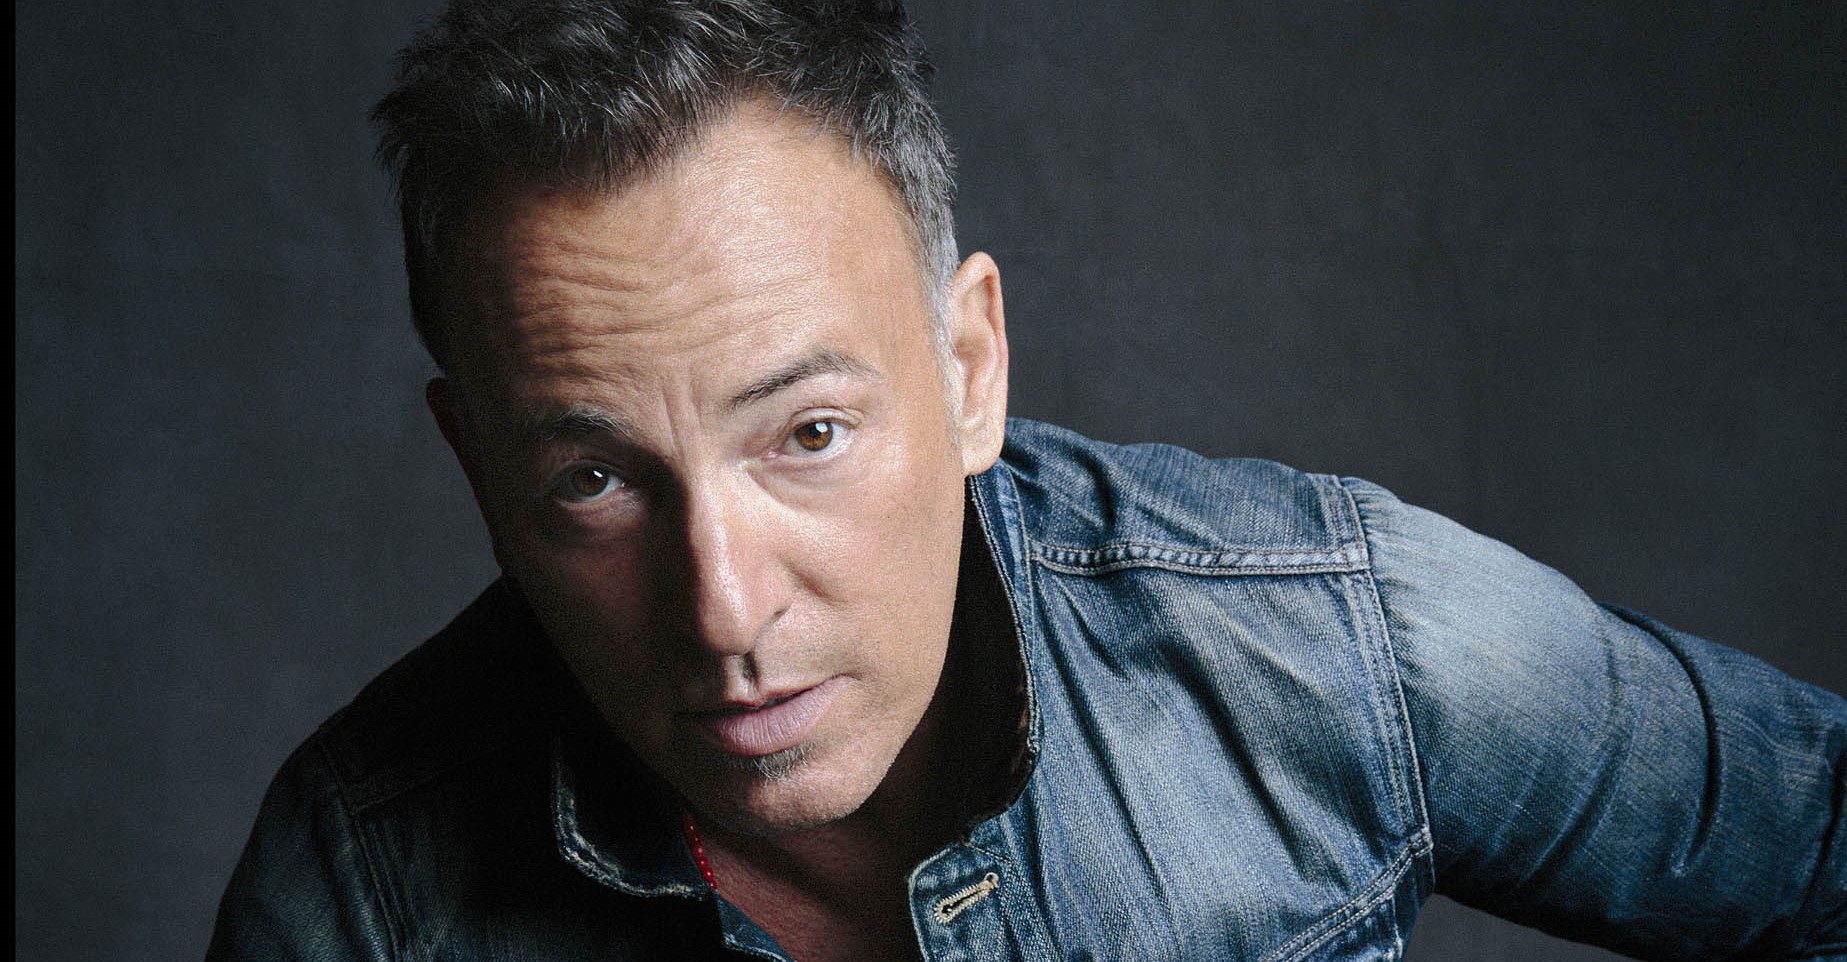 BRUCE SPRINGSTEEN AND THE E STREET BAND RETURN TO AUSTRALIA WITH THE SUMMER ’17 TOUR!